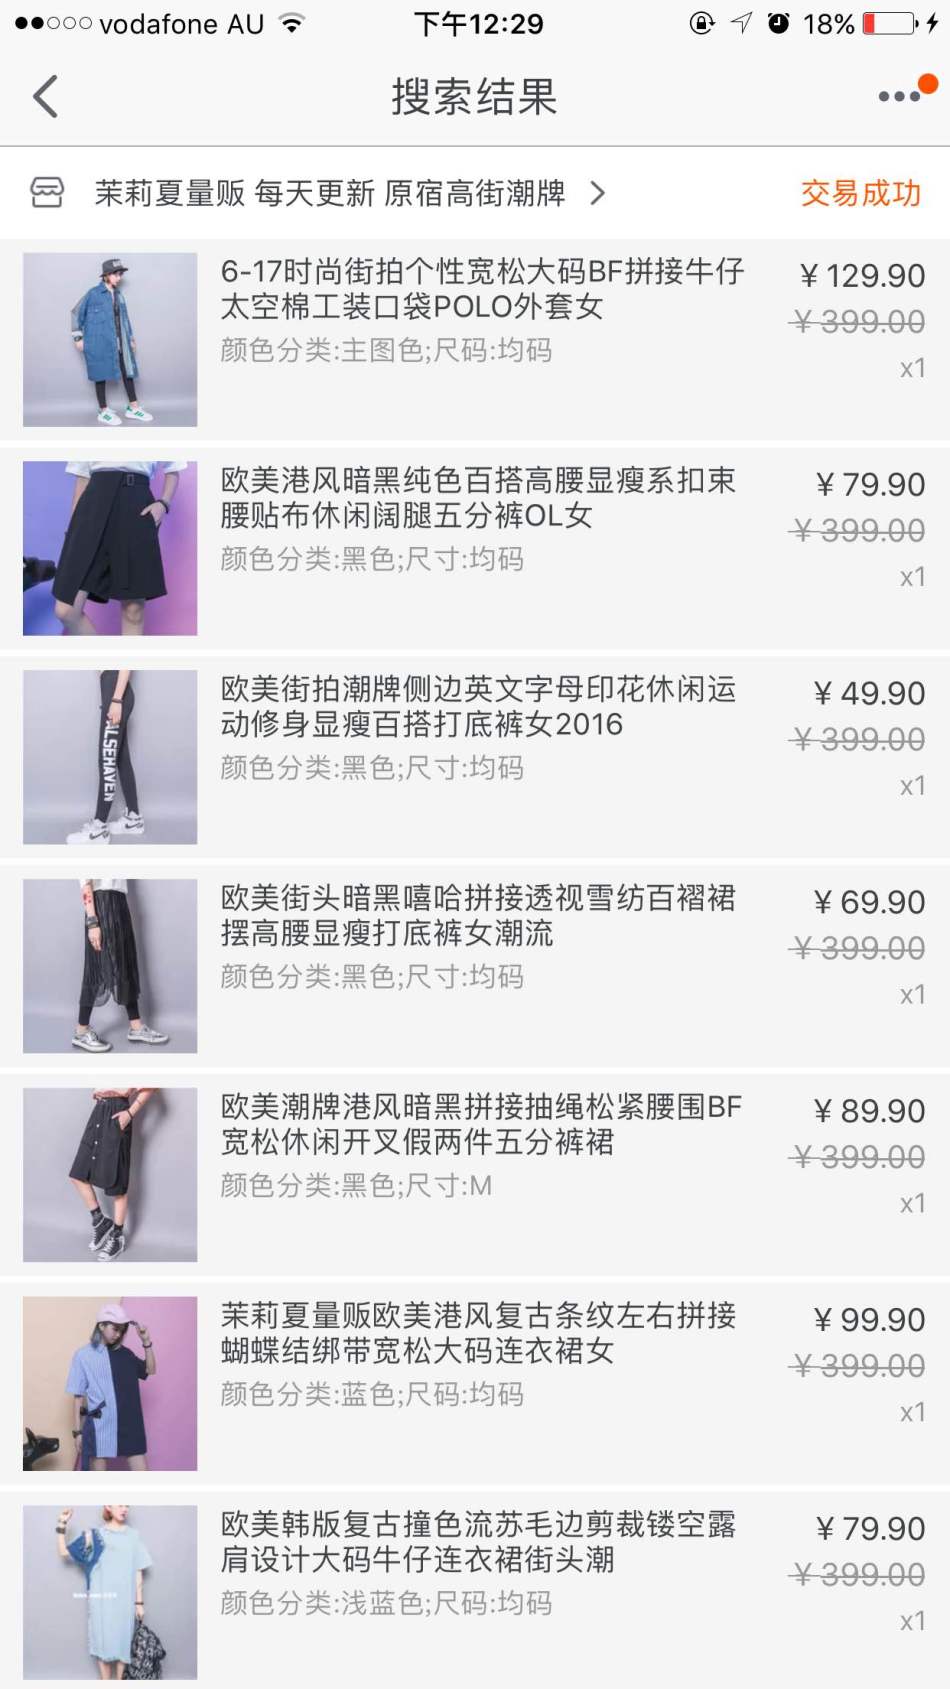 http://img1.superbuy.com/images/consult/2017/03/13/299f2f66ddfd046a6ac0d6062ff76744.jpg?x-oss-process=image/resize,w_950